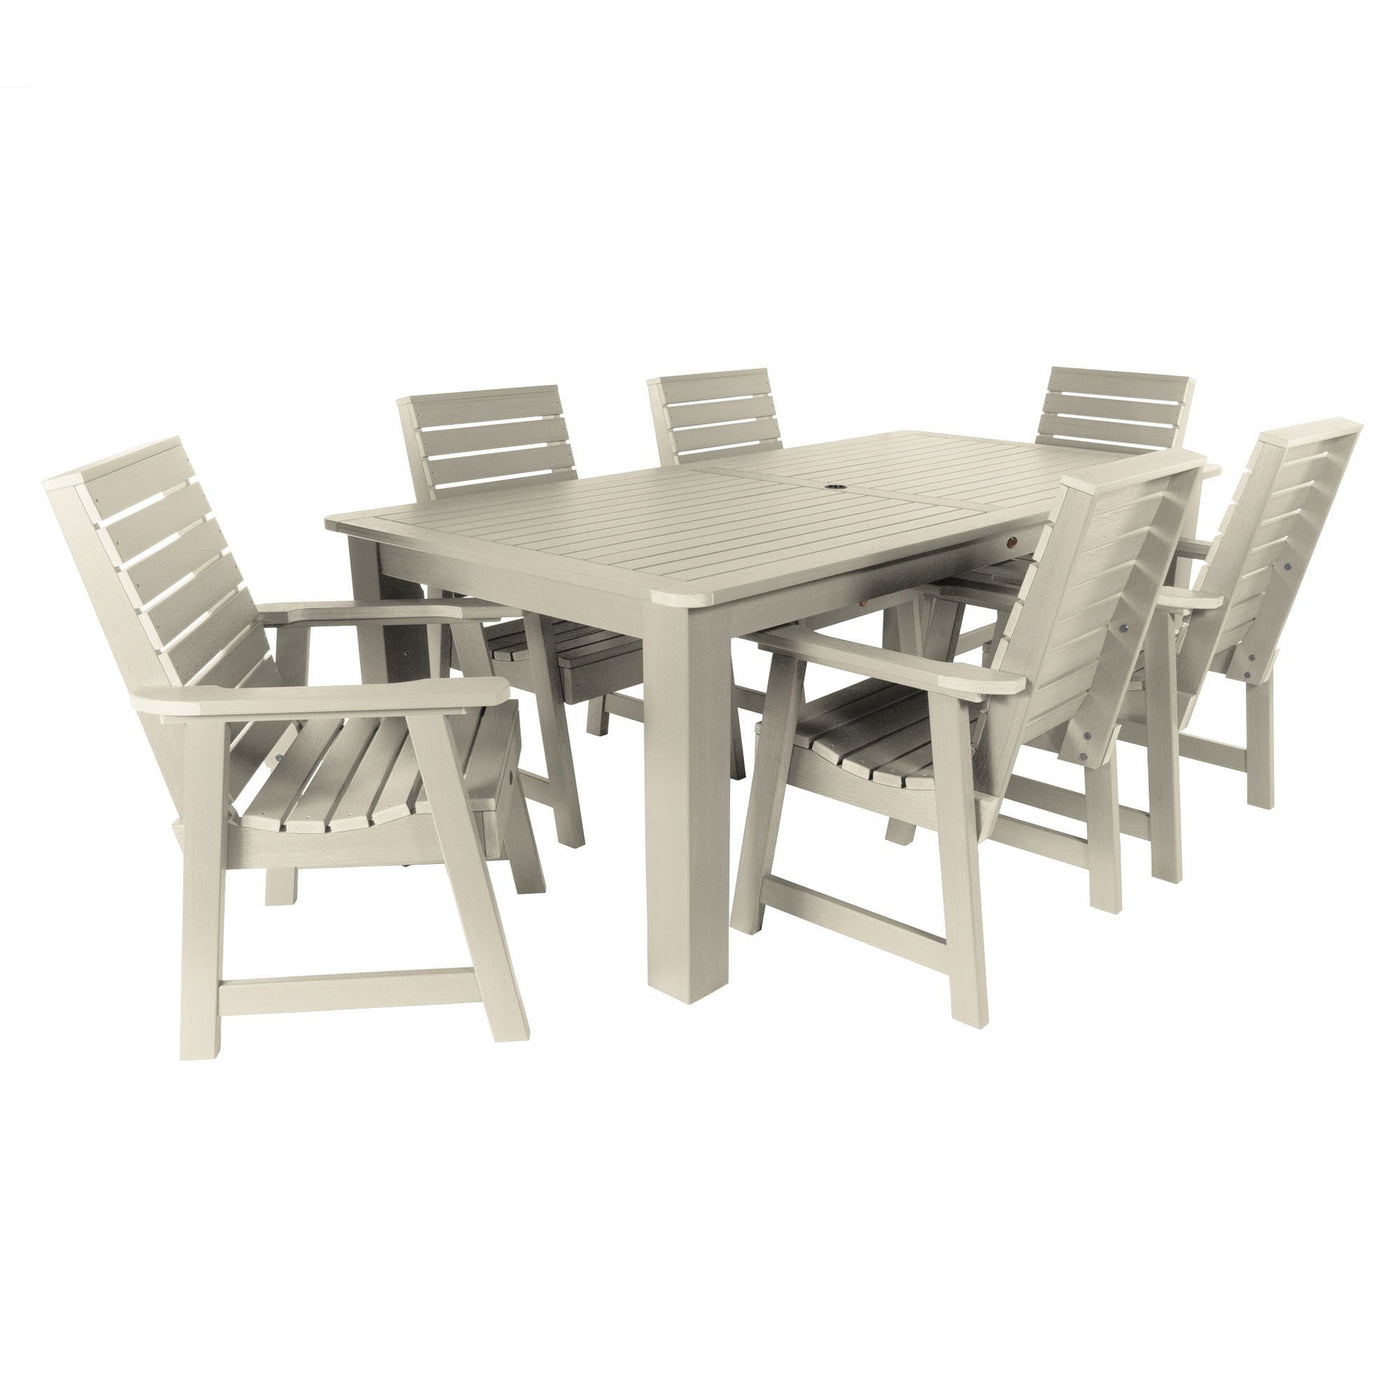 Weatherly 7pc Rectangular Outdoor Dining Set 42in x 84in - Dining Height Dining Highwood USA Whitewash 